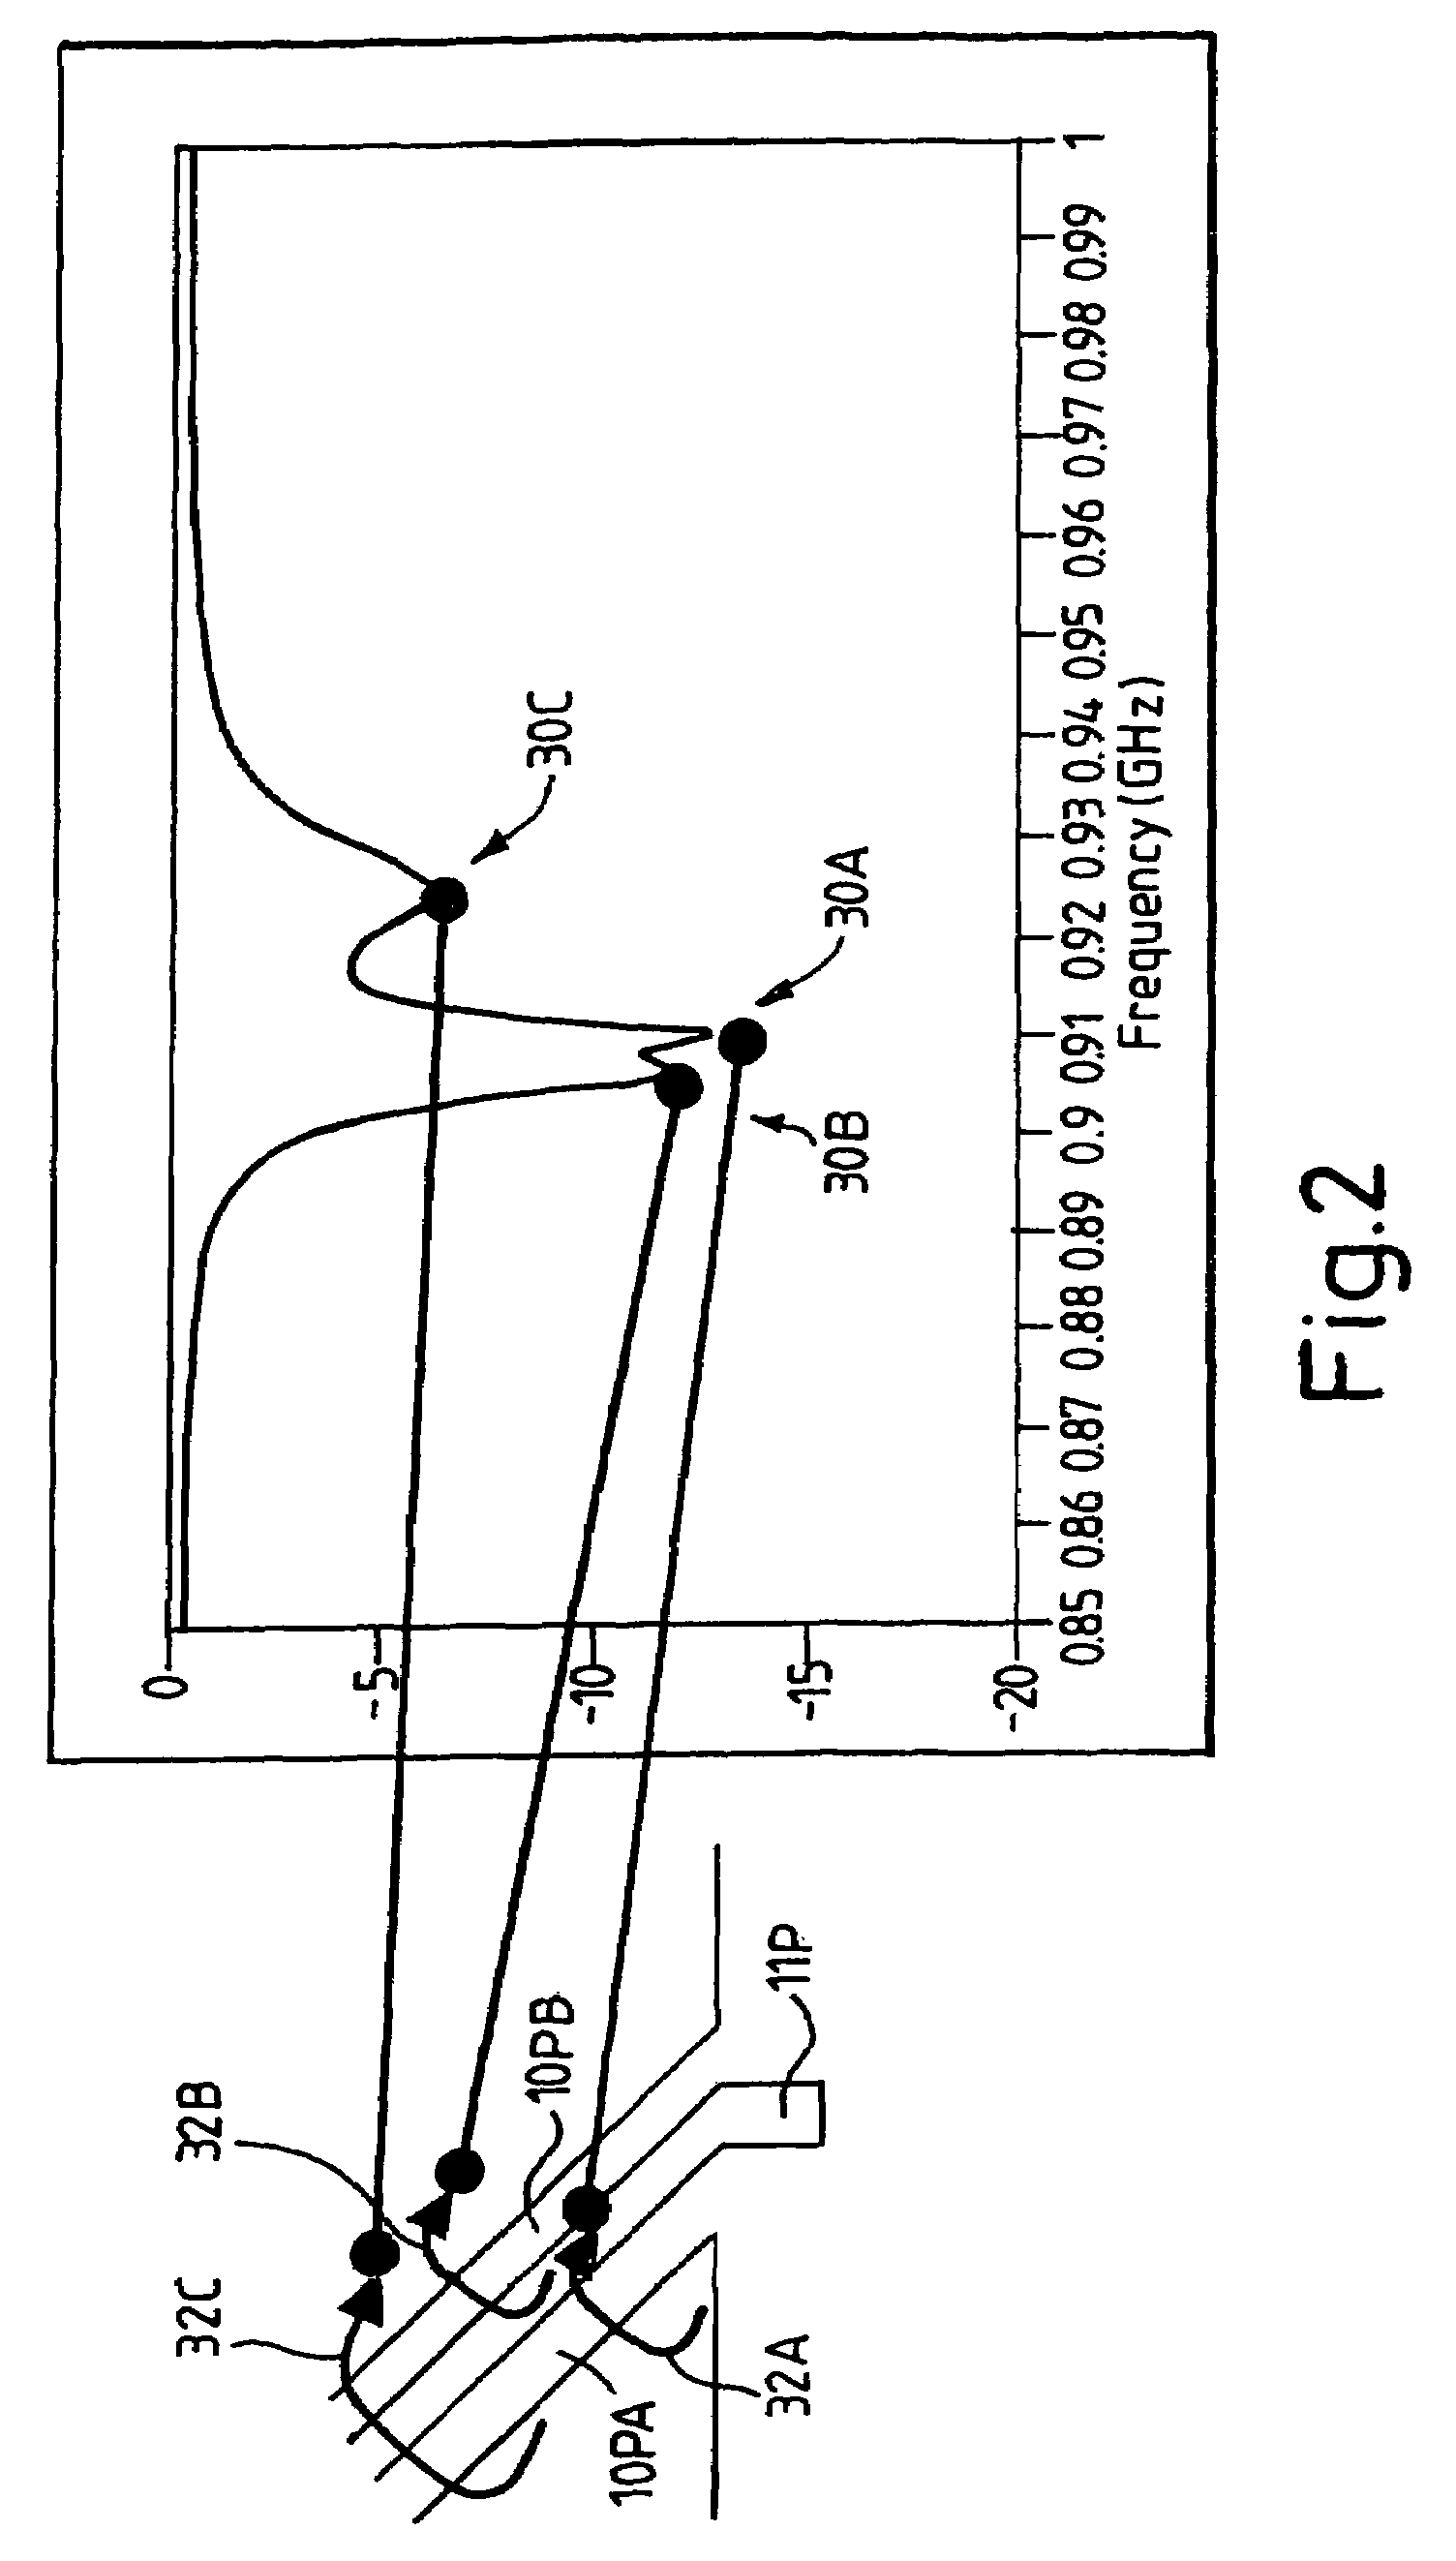 Dielectrically-loaded antenna